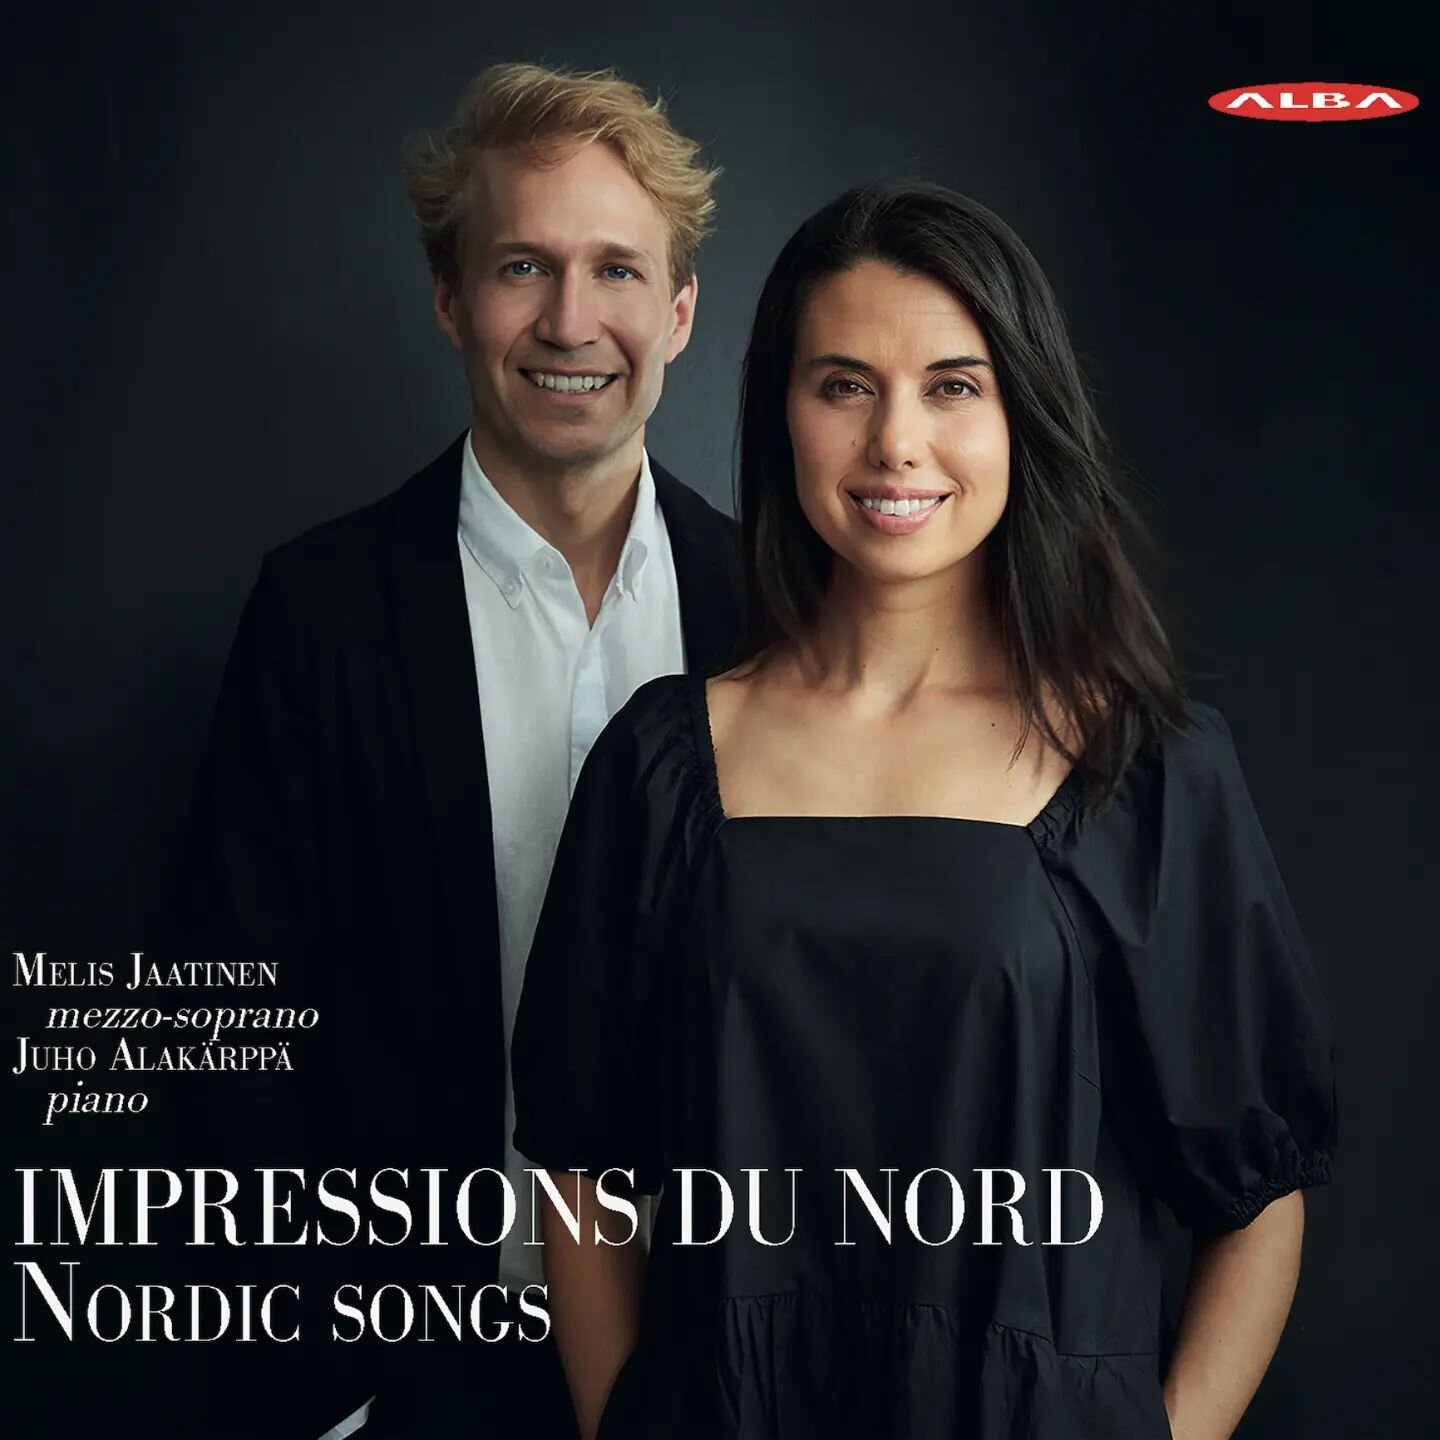 I&rsquo;M SO HAPPY- FINALLY!🎉🎼🎶☺️
&ndash;&nbsp;OUR FIRST ALBUM has been released!
IMPRESSIONS DU NORD - NORDIC SONGS&nbsp;
Available at streaming platforms later this spring

To read and listen more check out the link in my bio☝️
Released by @alba